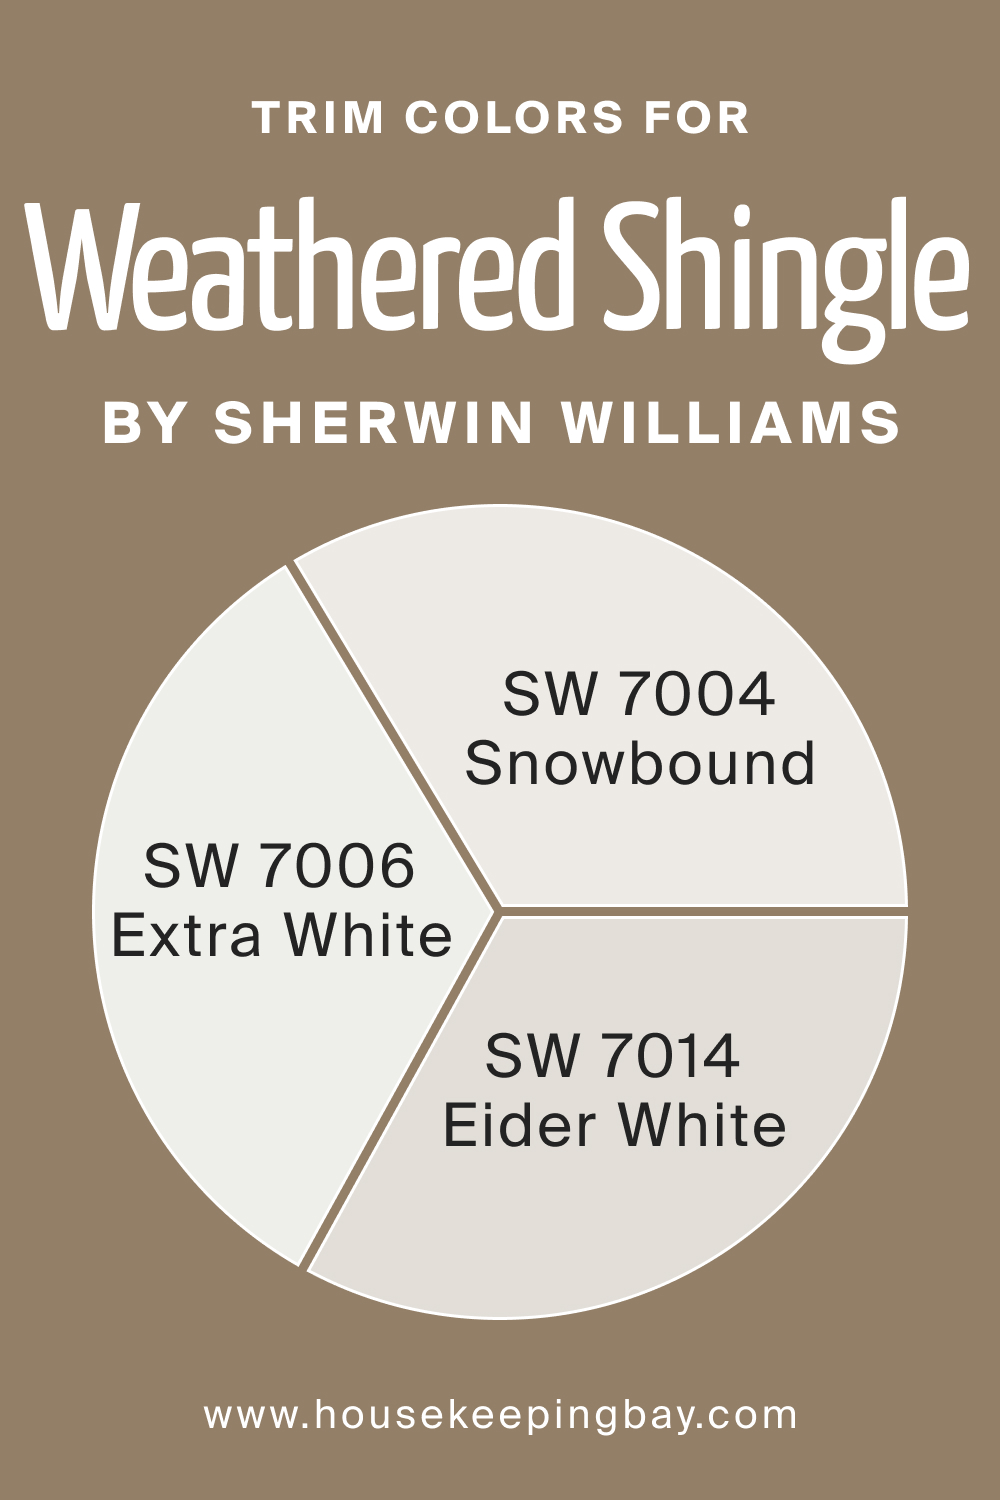 Trim Colors of SW 2841 Weathered Shingle by Sherwin Williams